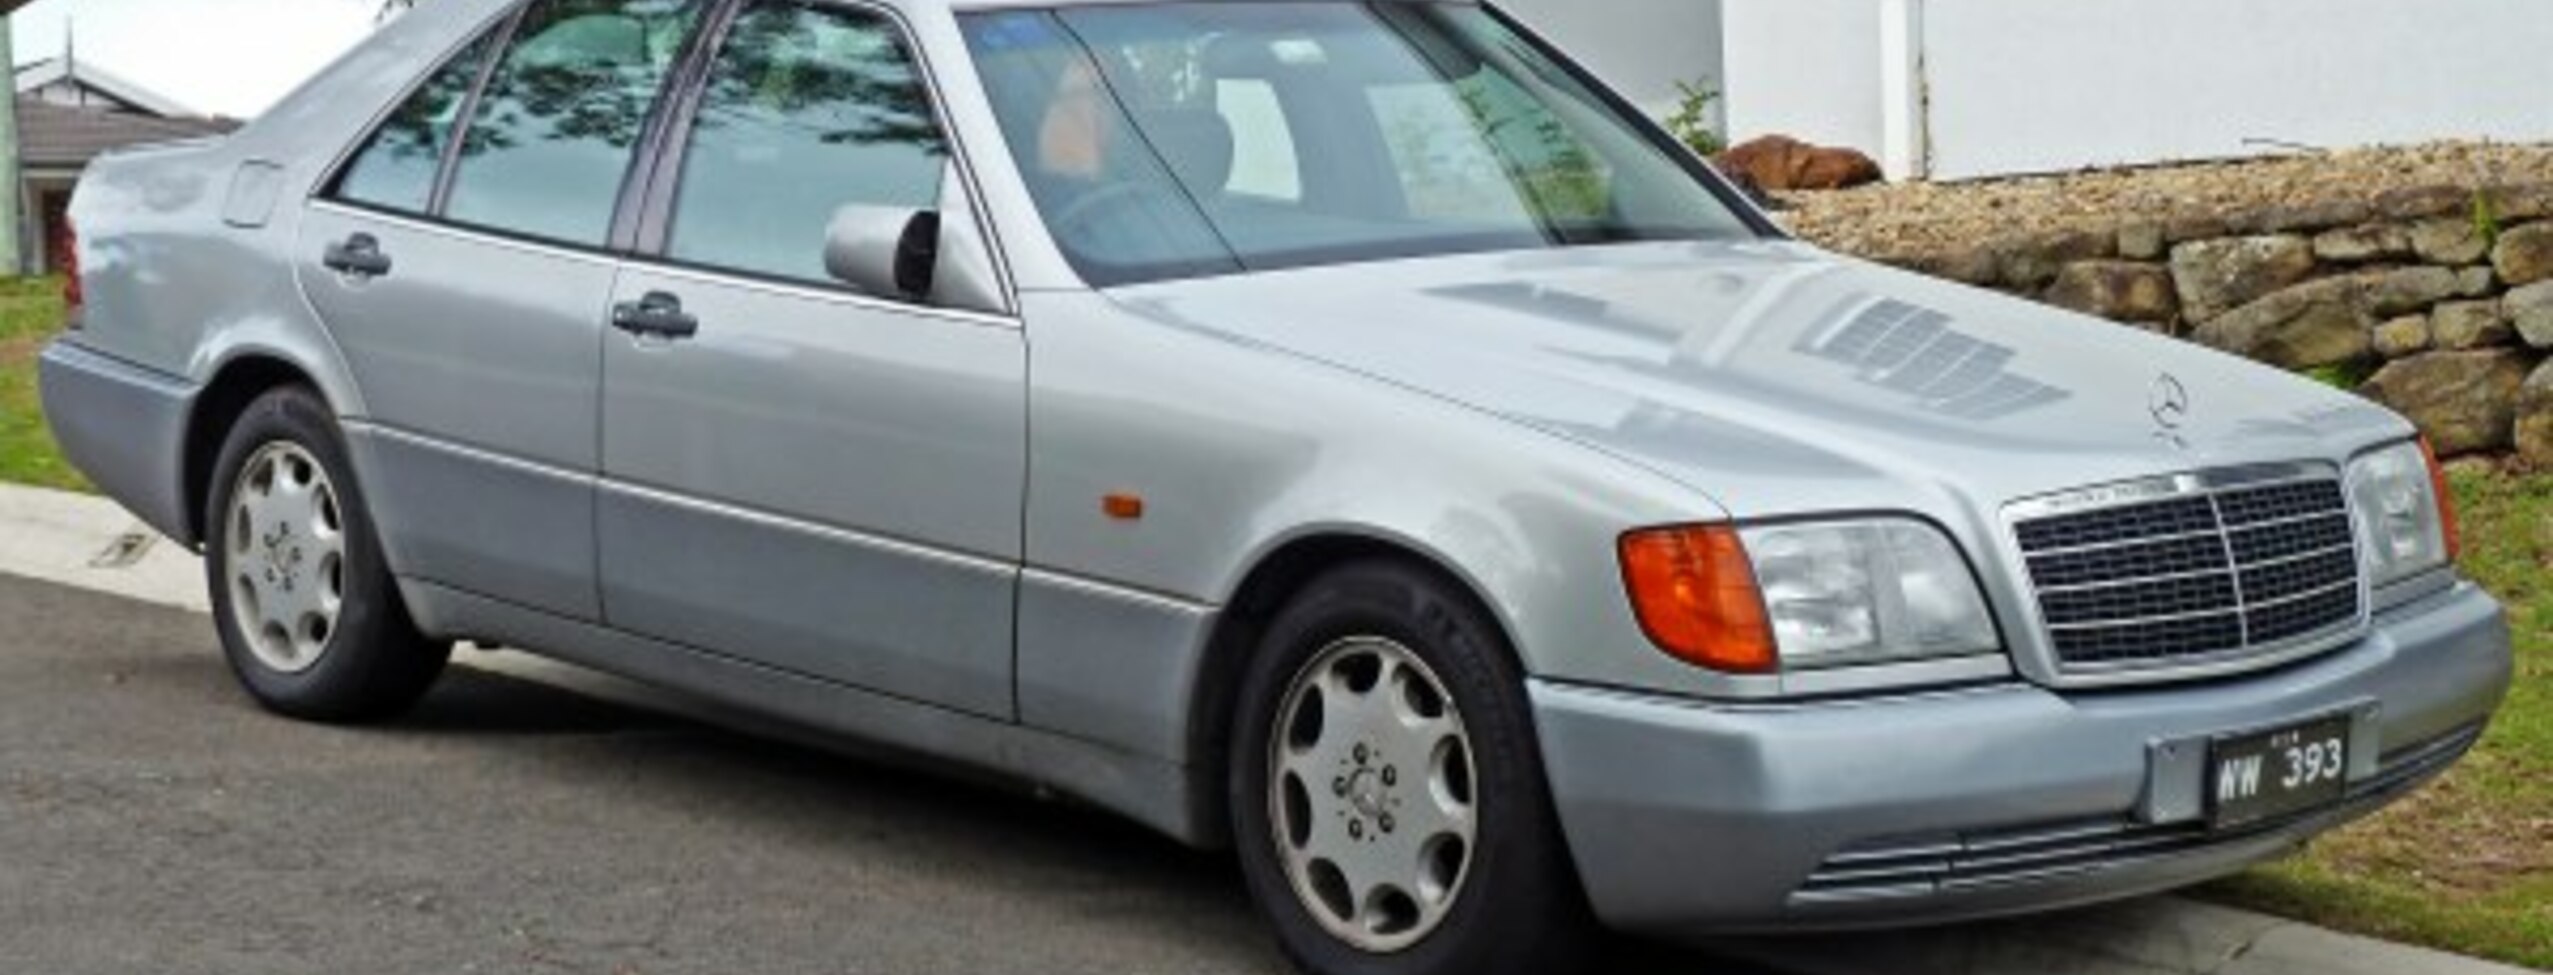 Mercedes-Benz S-class (W140) S 600 V12 (394 Hp) Automatic 1993, 1994, 1995, 1996, 1997, 1998 